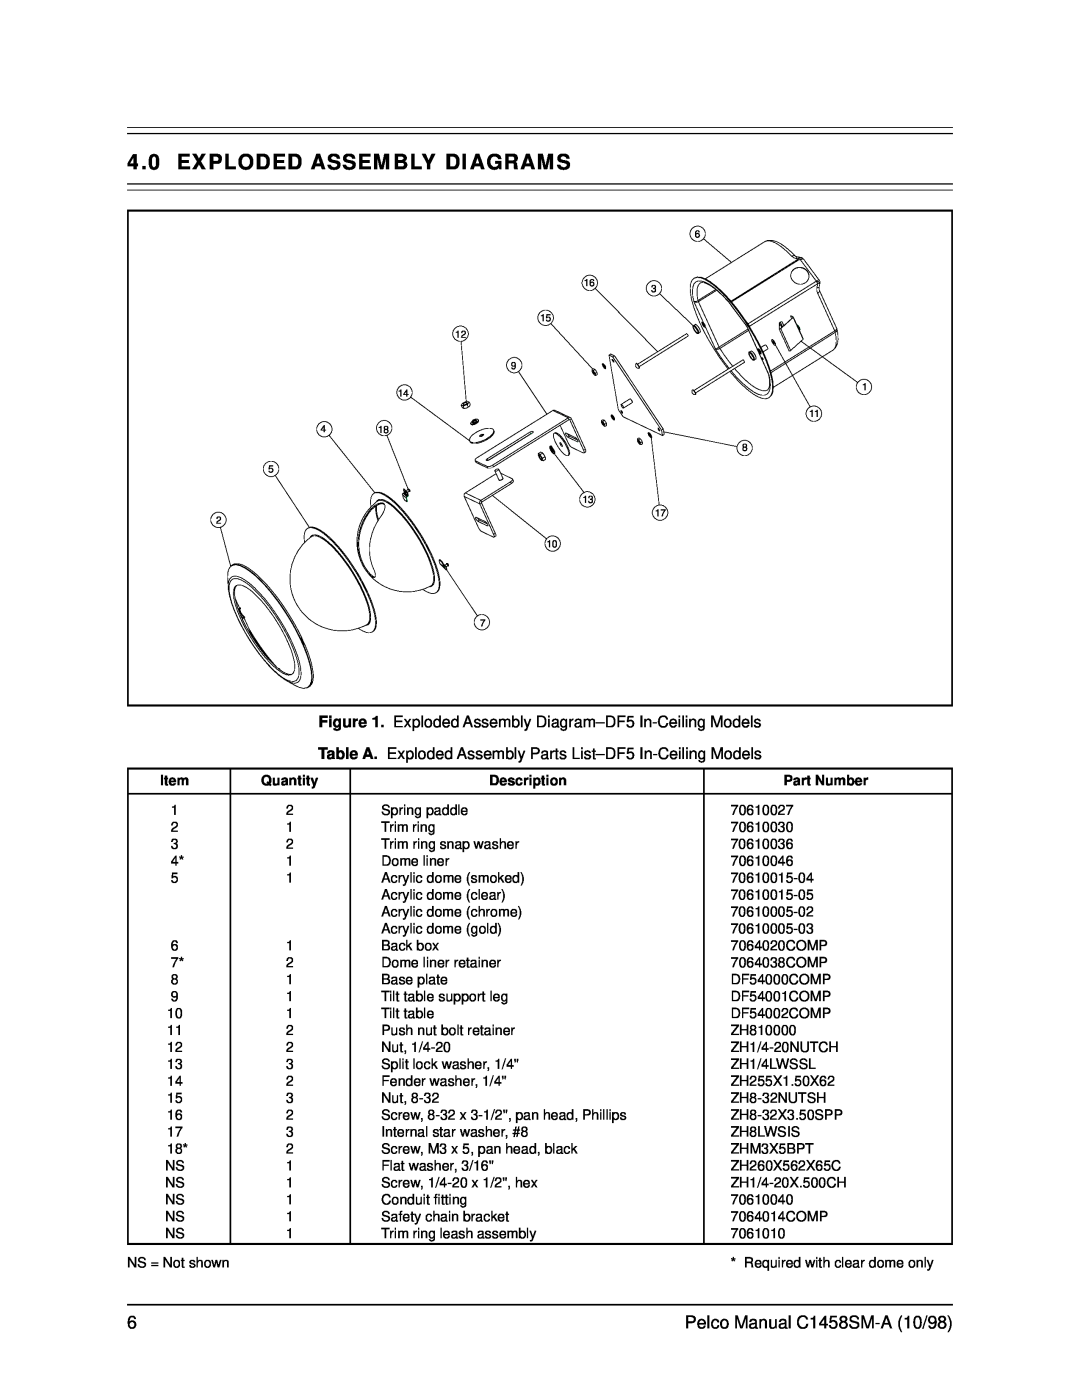 Pelco DF5S service manual Exploded Assembly Diagrams, Pelco Manual C1458SM-A10/98 